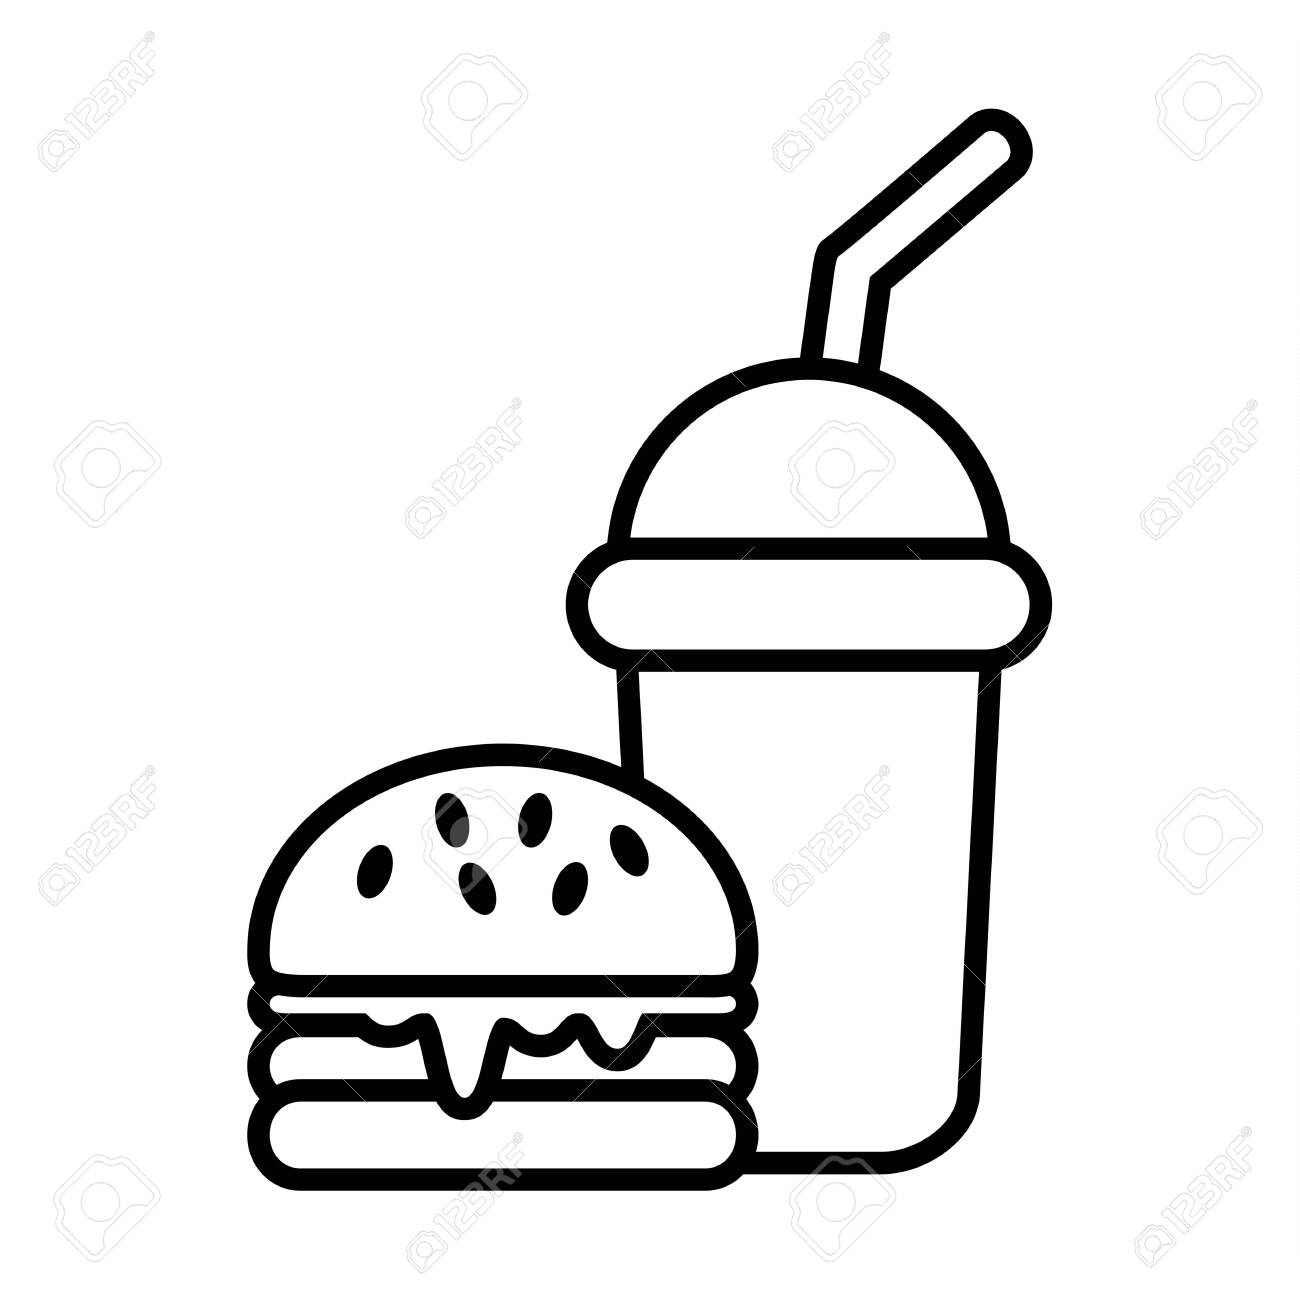 Food and drink icon fast food symbol vector illustration restaurant sign outline for coloring book pages royalty free svg cliparts vectors and stock illustration image